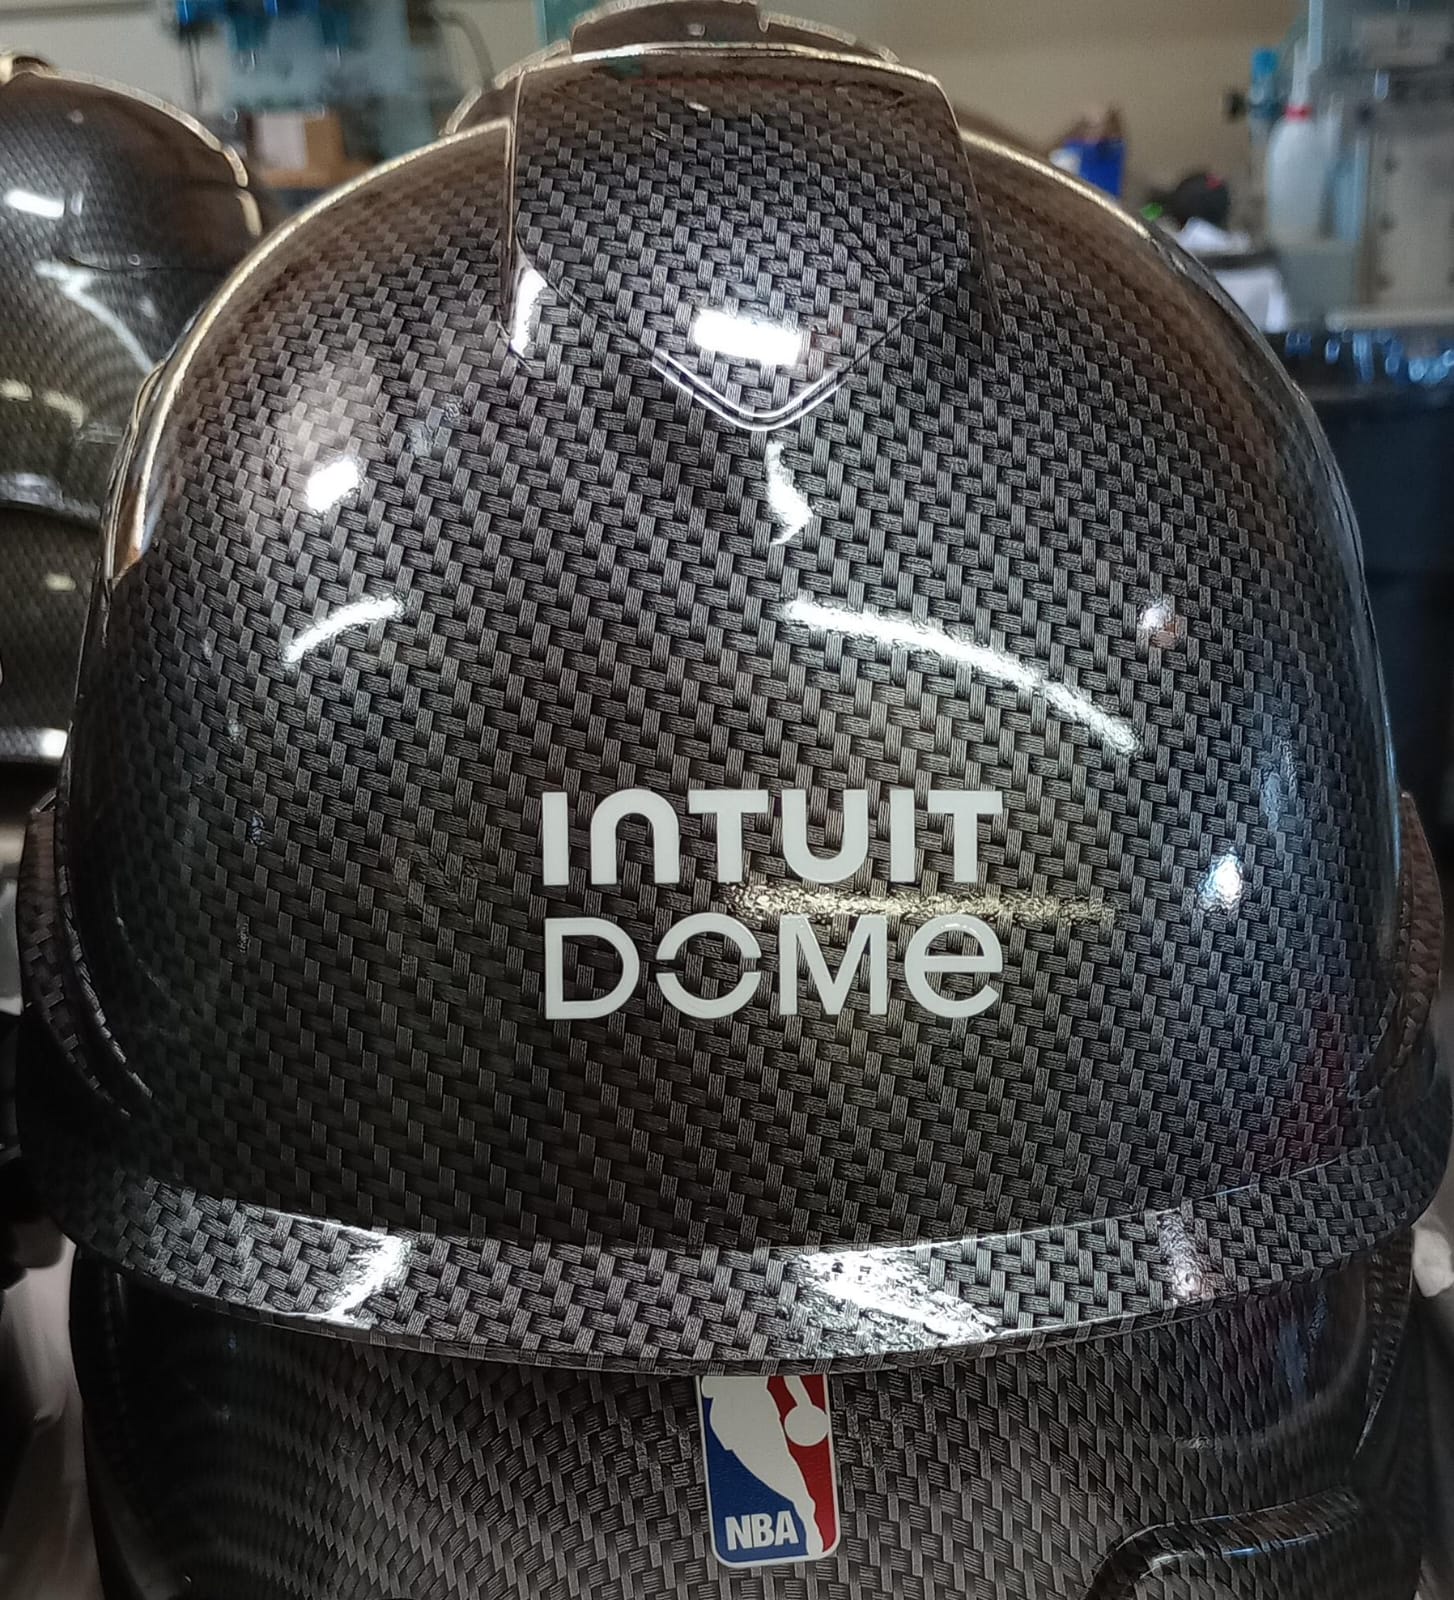 Riding the Wave of Success: Custom Pad Printed Helmets for Your Next Event